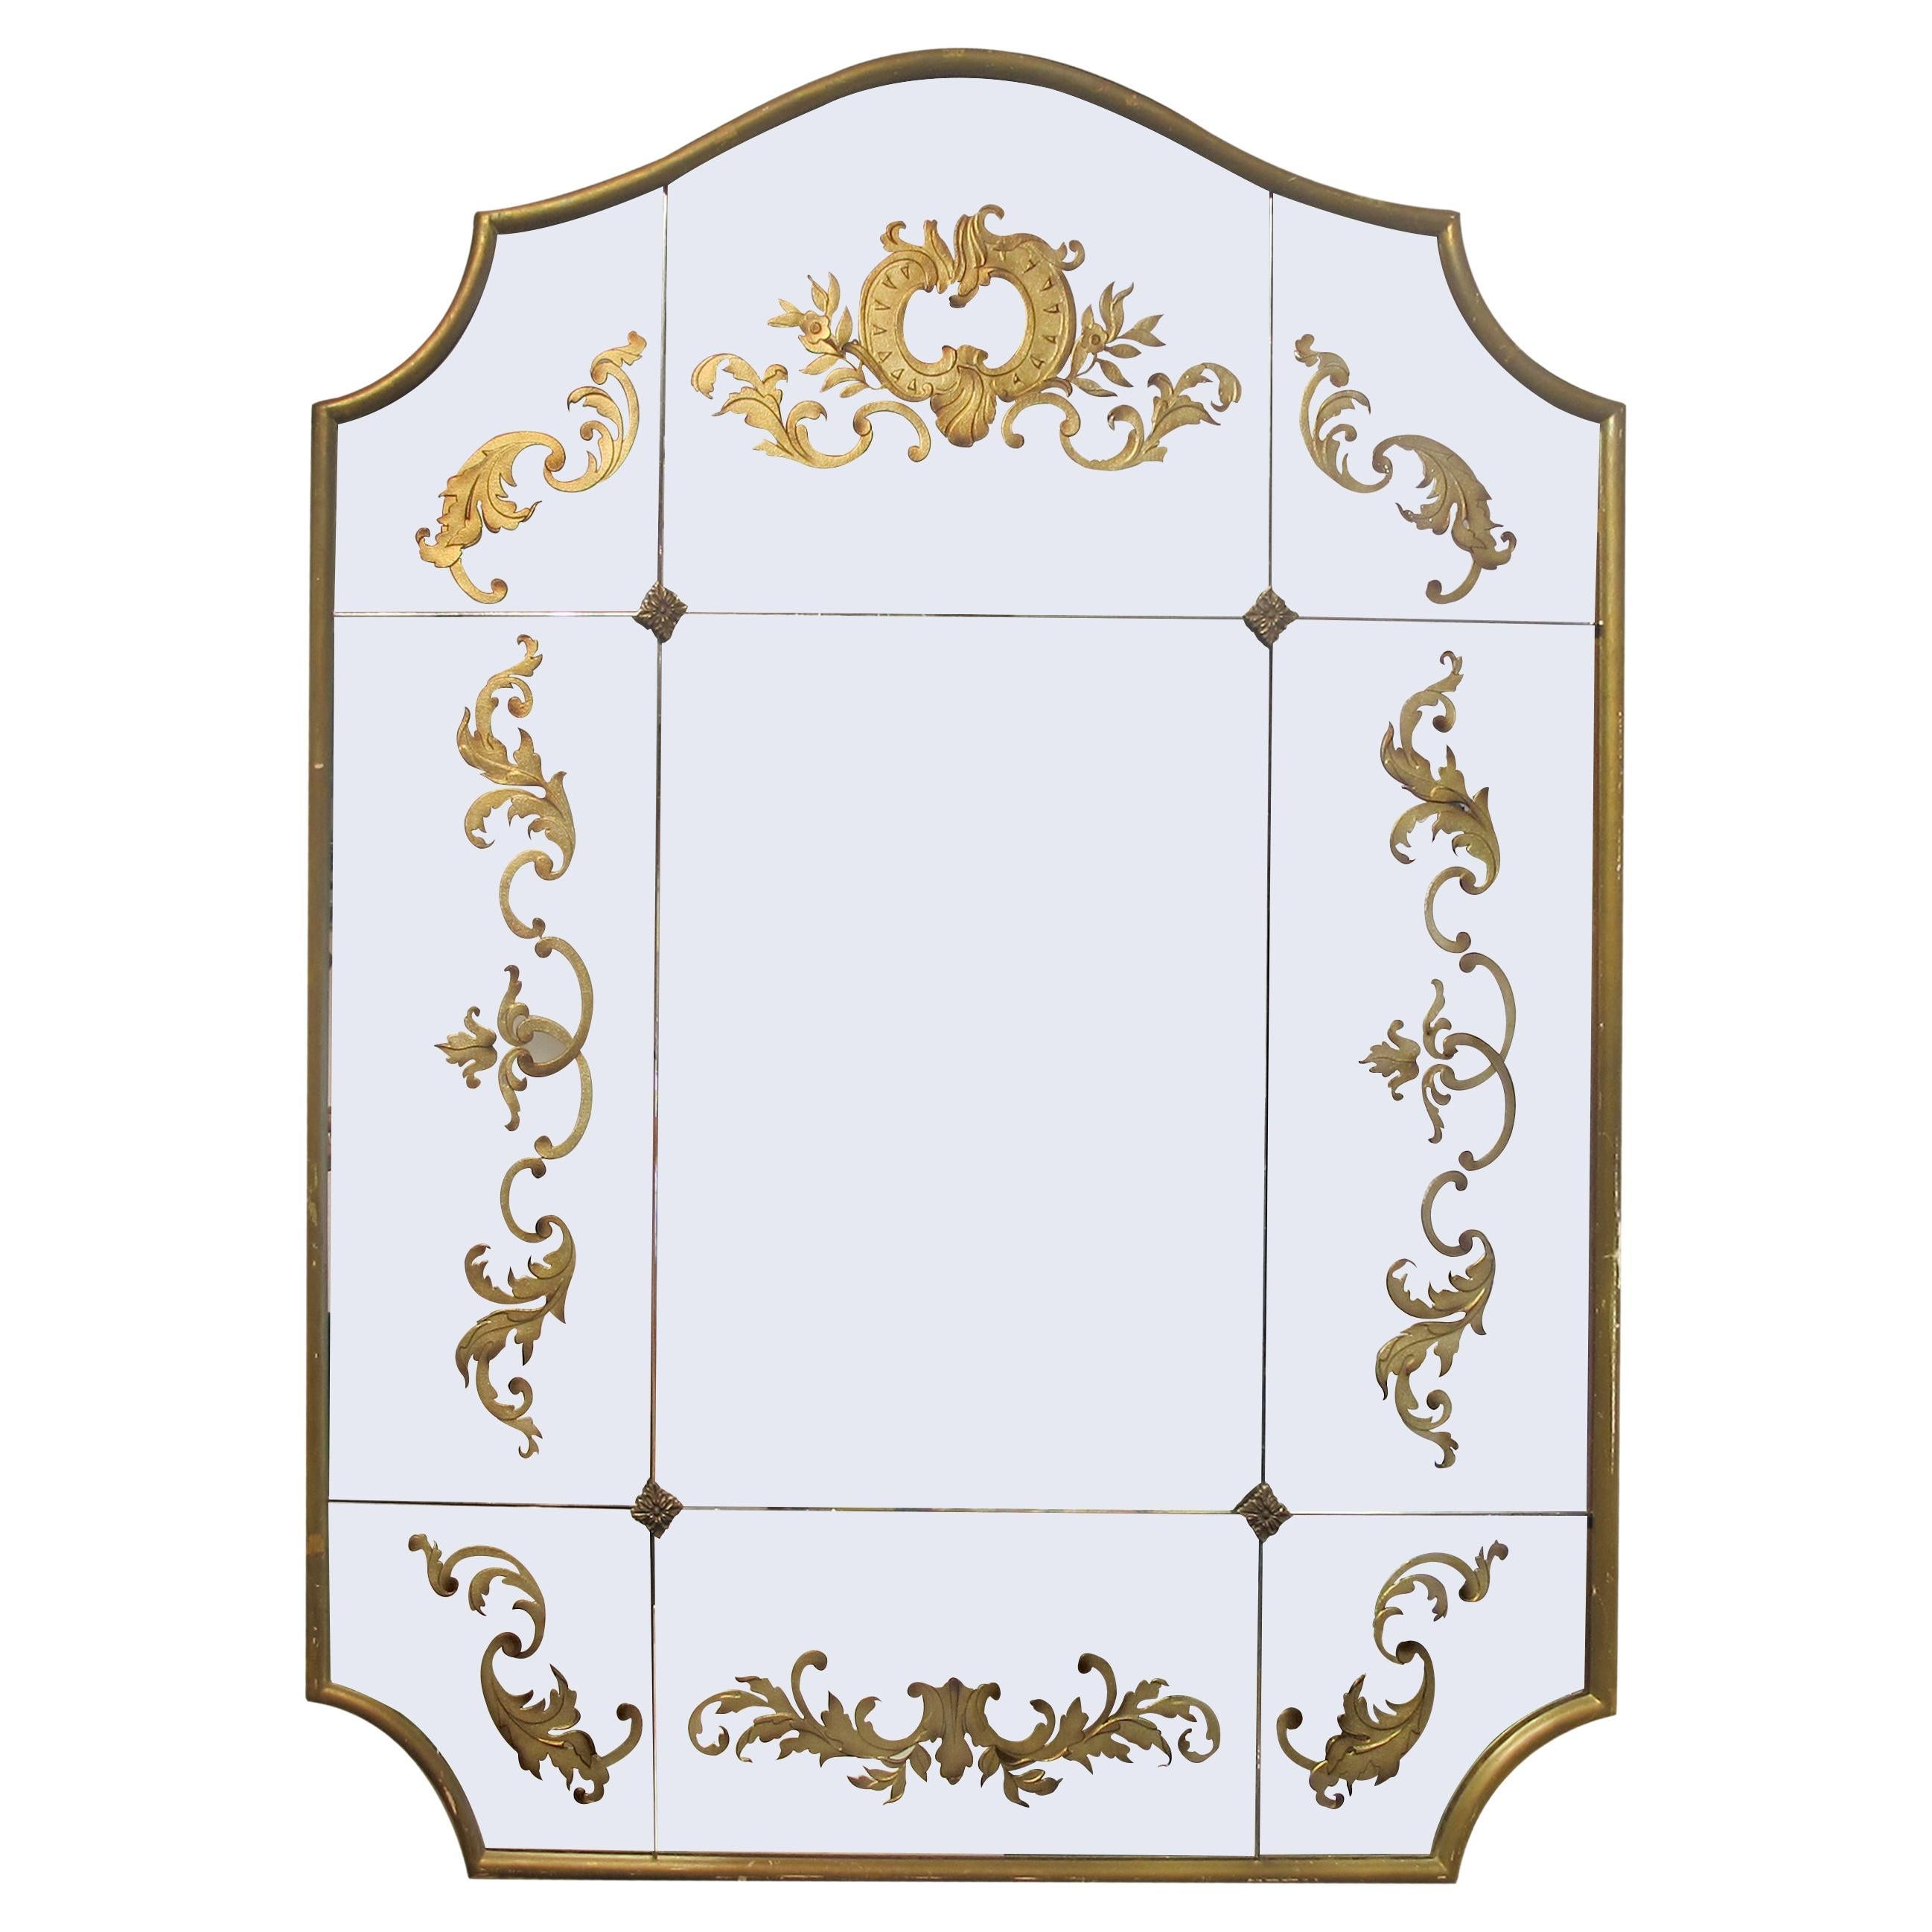 1940s French Wall Mirror with Eglomisé Gold Leaf Design 